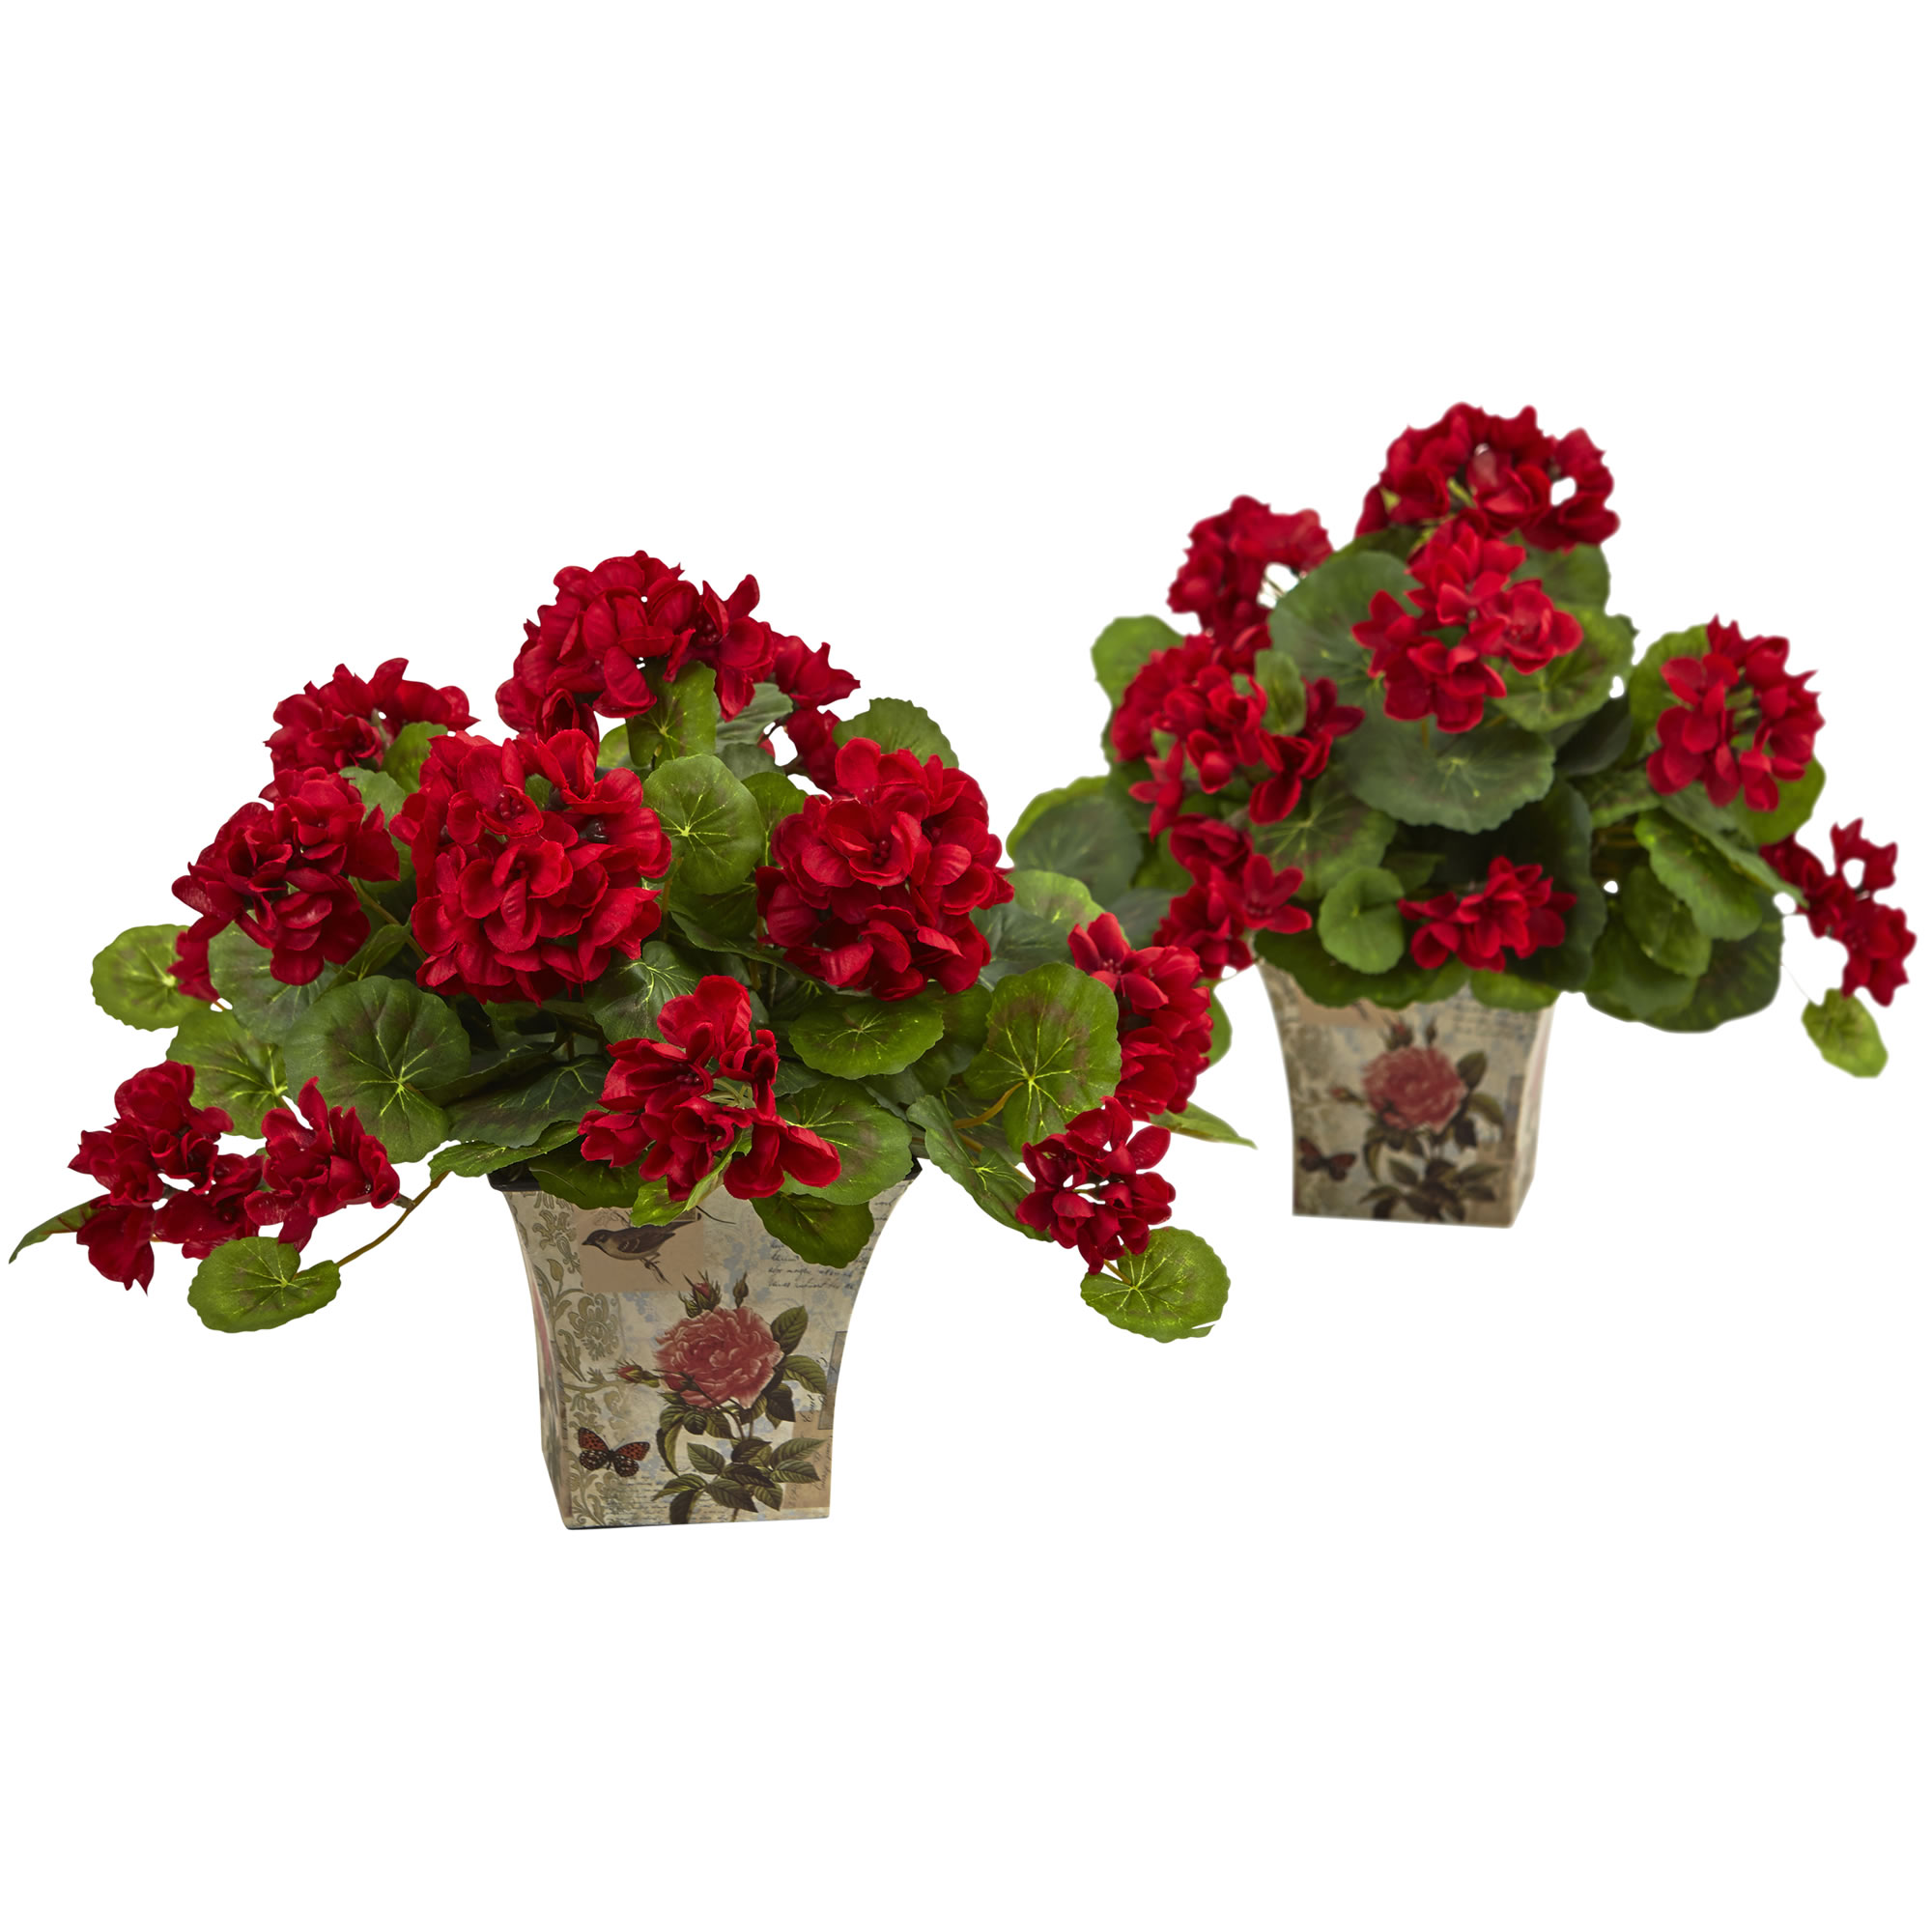 11 Inch Red Geranium Flowering Silk Plant With Floral Planter (set Of 2)